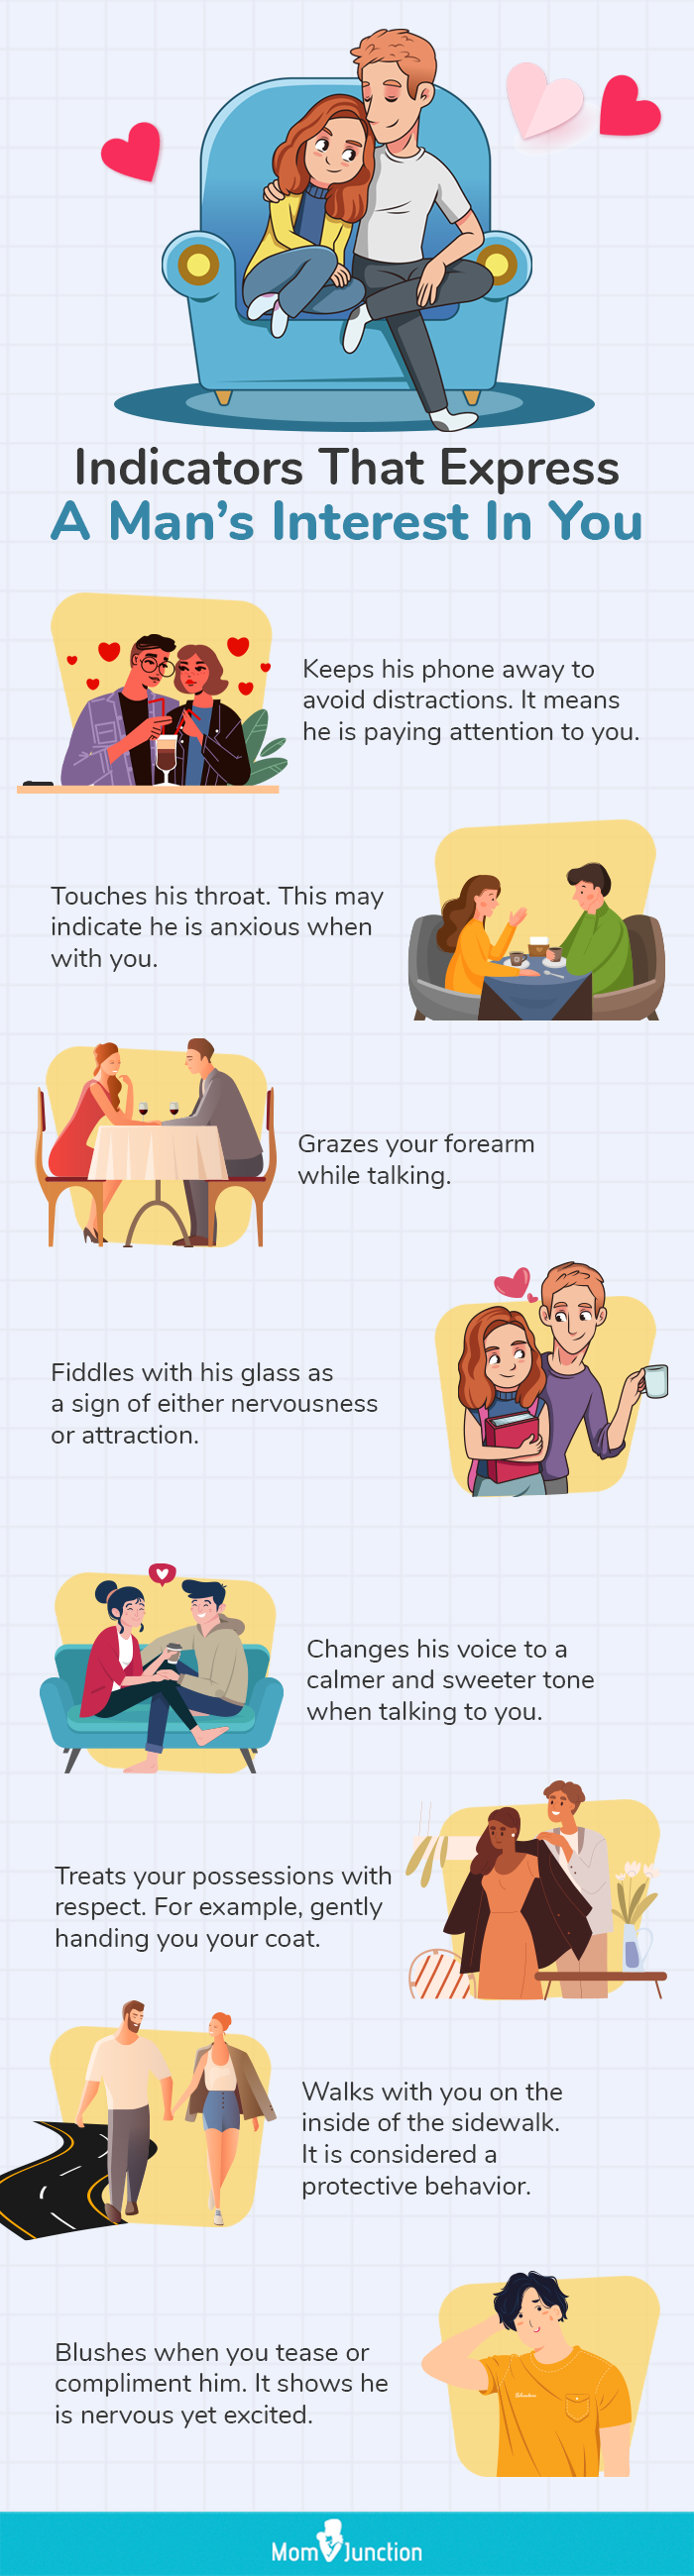 indicators that express a man’s interest in you (infographic)